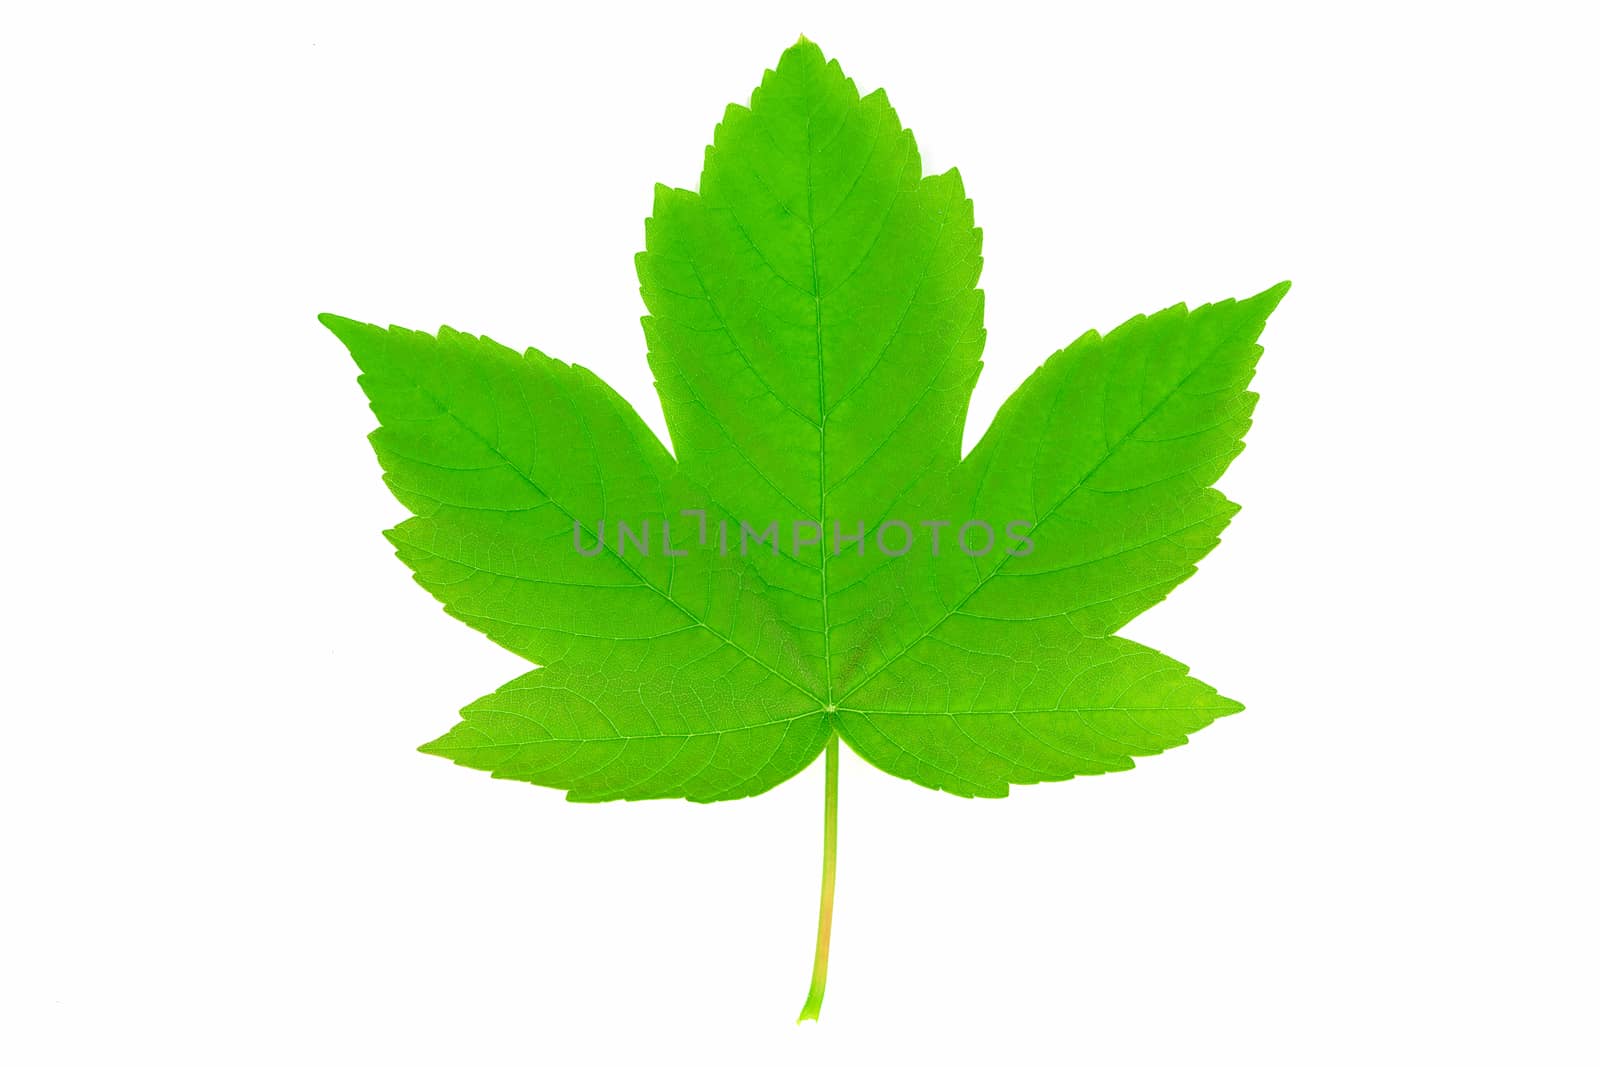 Perfect sycamore maple leaf by wdnet_studio